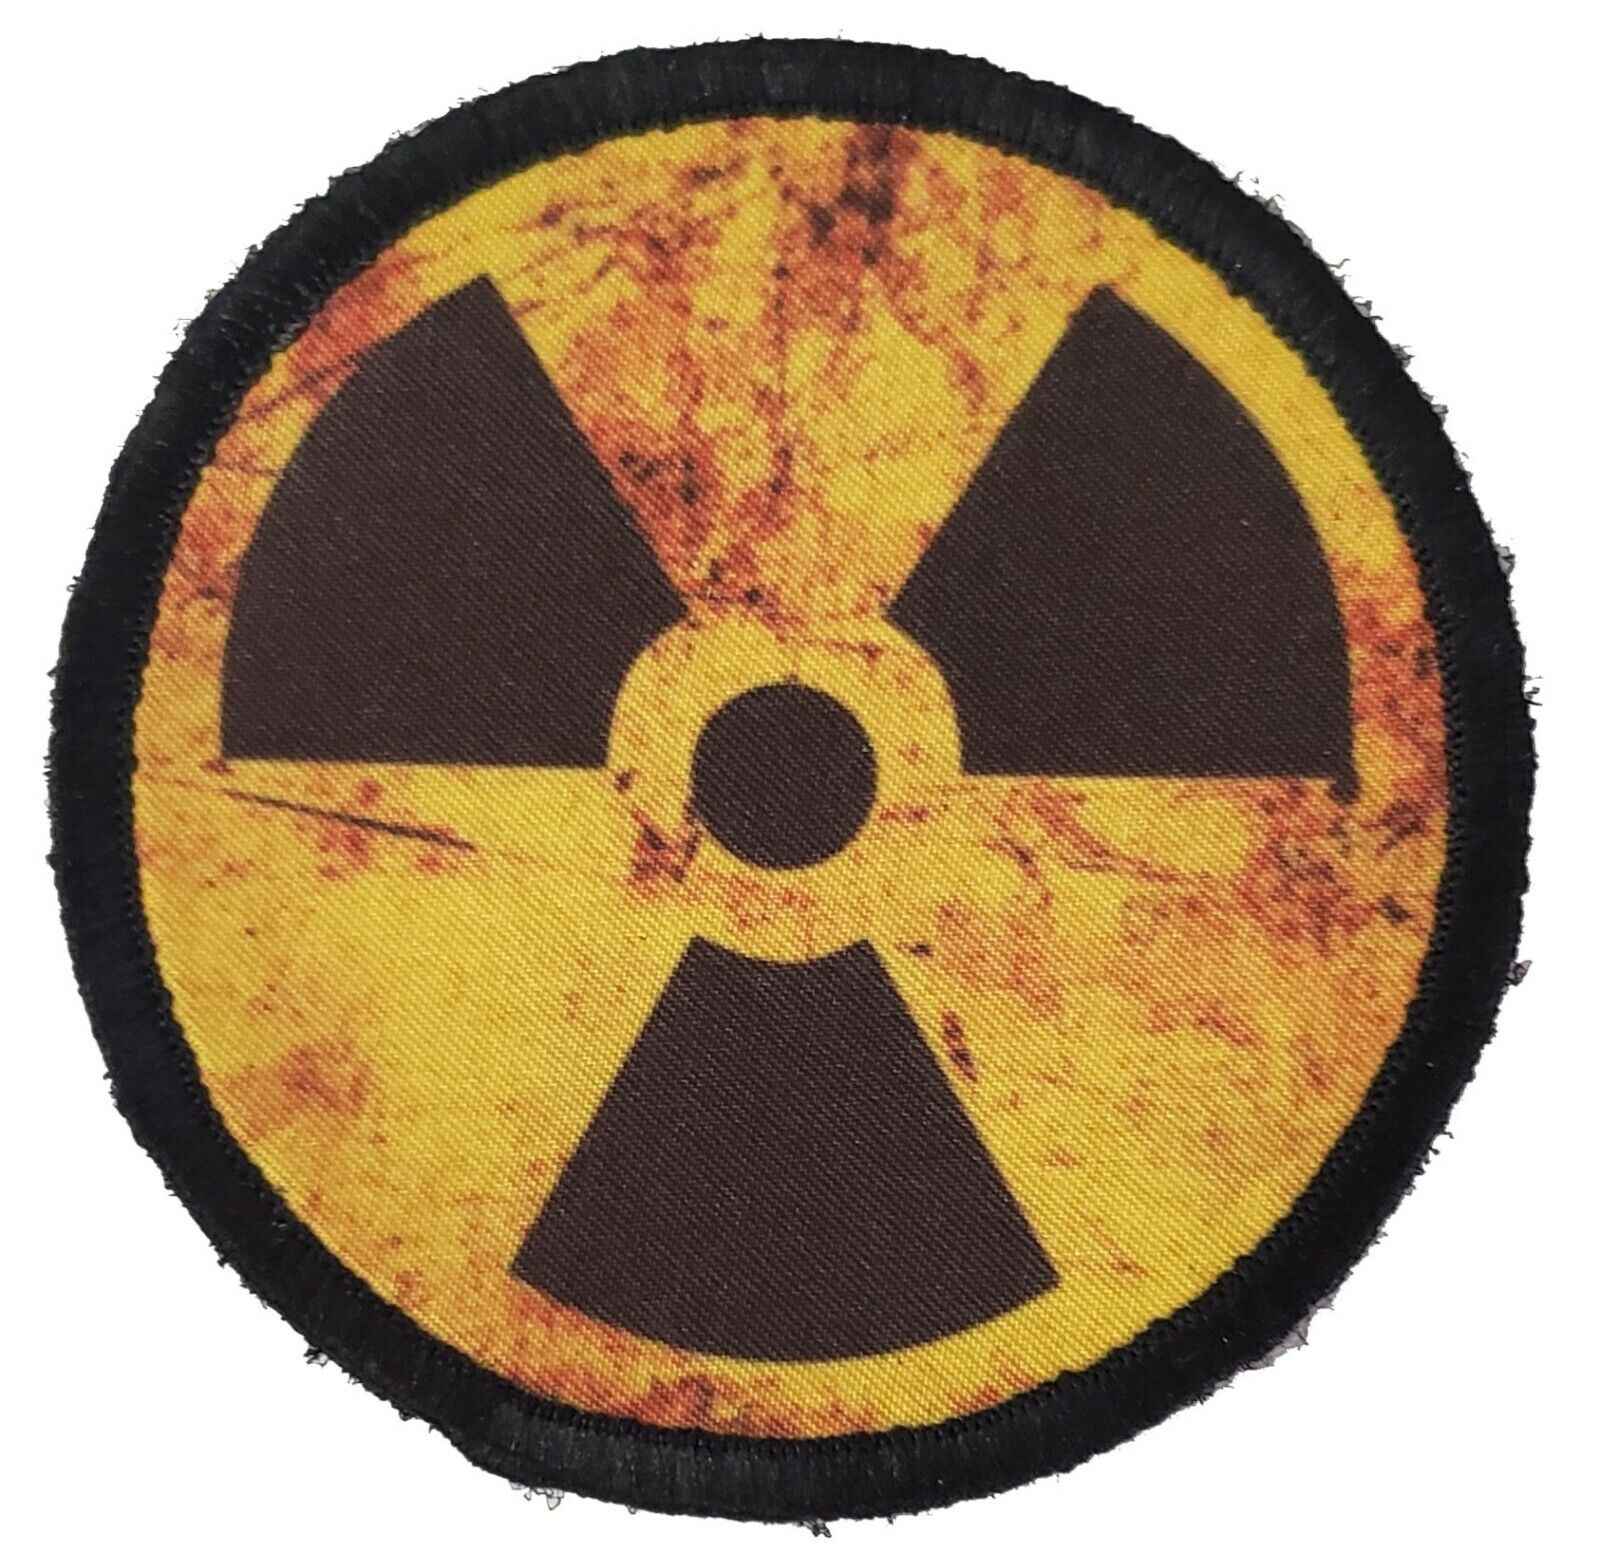 Radiation Nuclear Sign Morale Patch Tactical Army Military Hook Flag